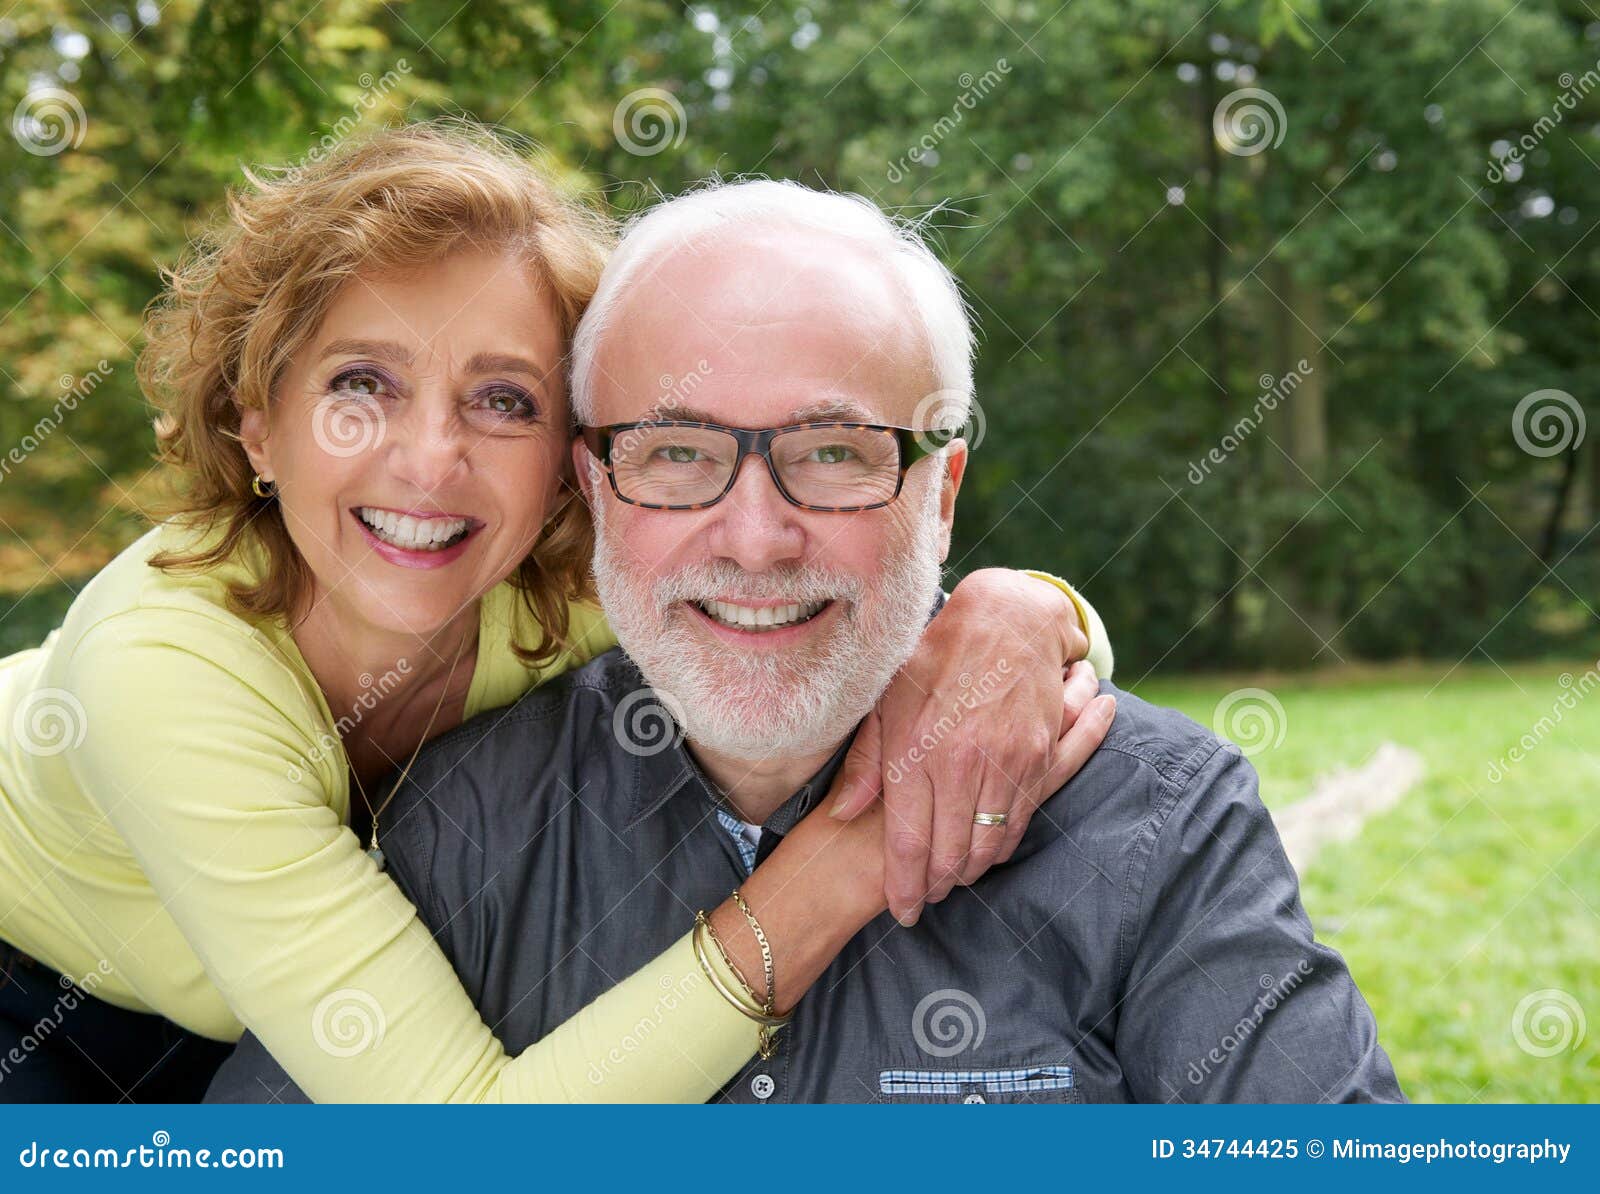 happy married couple smiling together outdoors